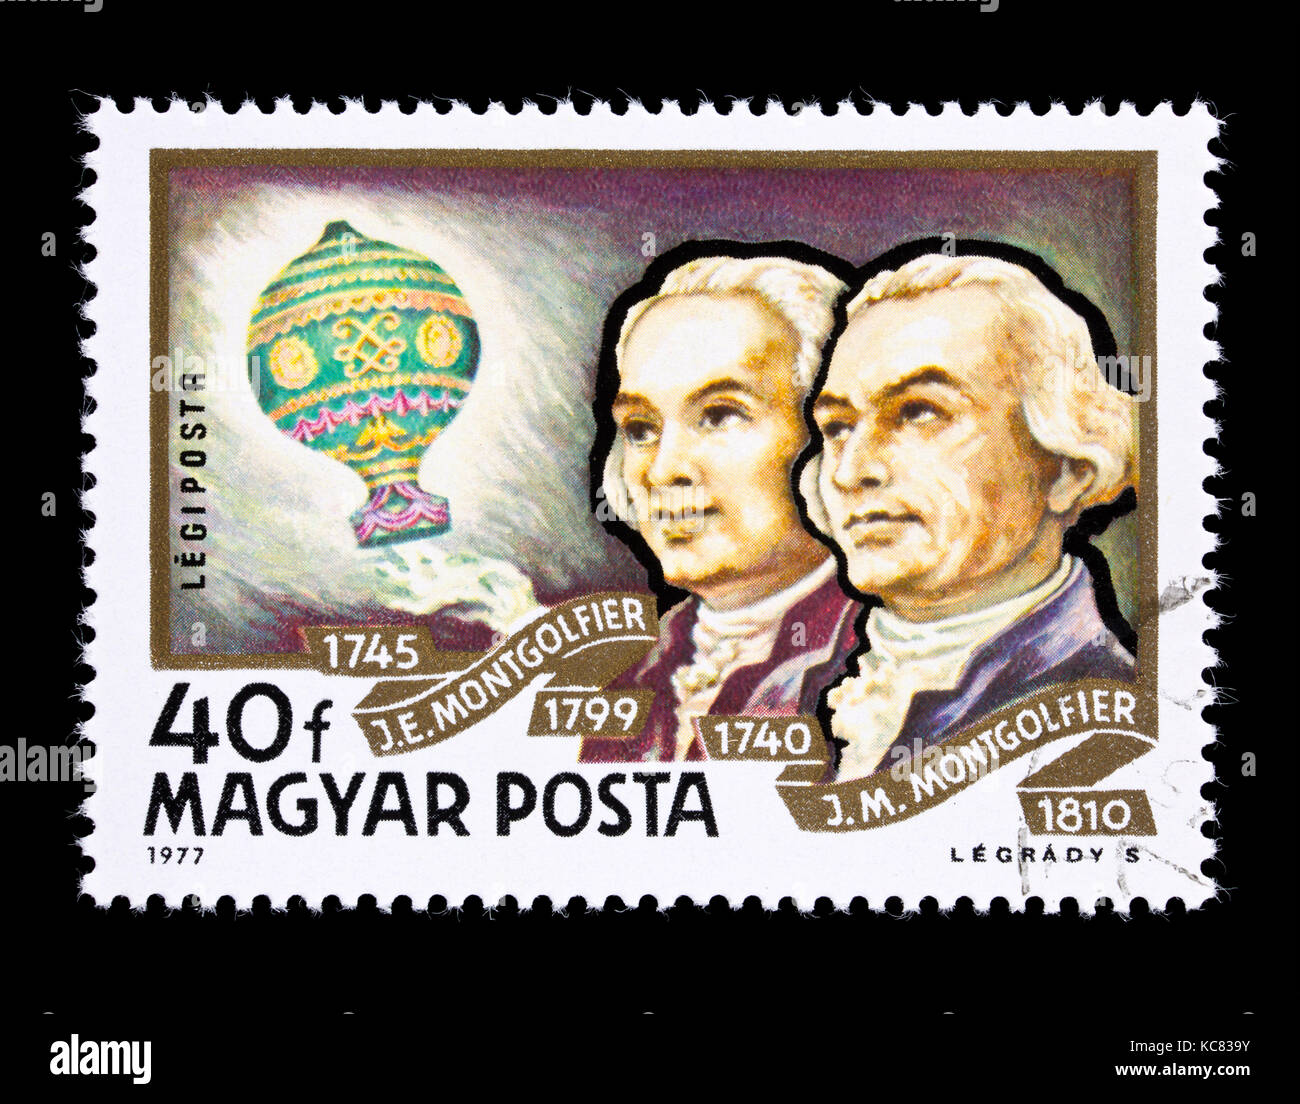 Postage stamp from Hungary depicting the Montgolfier brothers and their balloon. Stock Photo